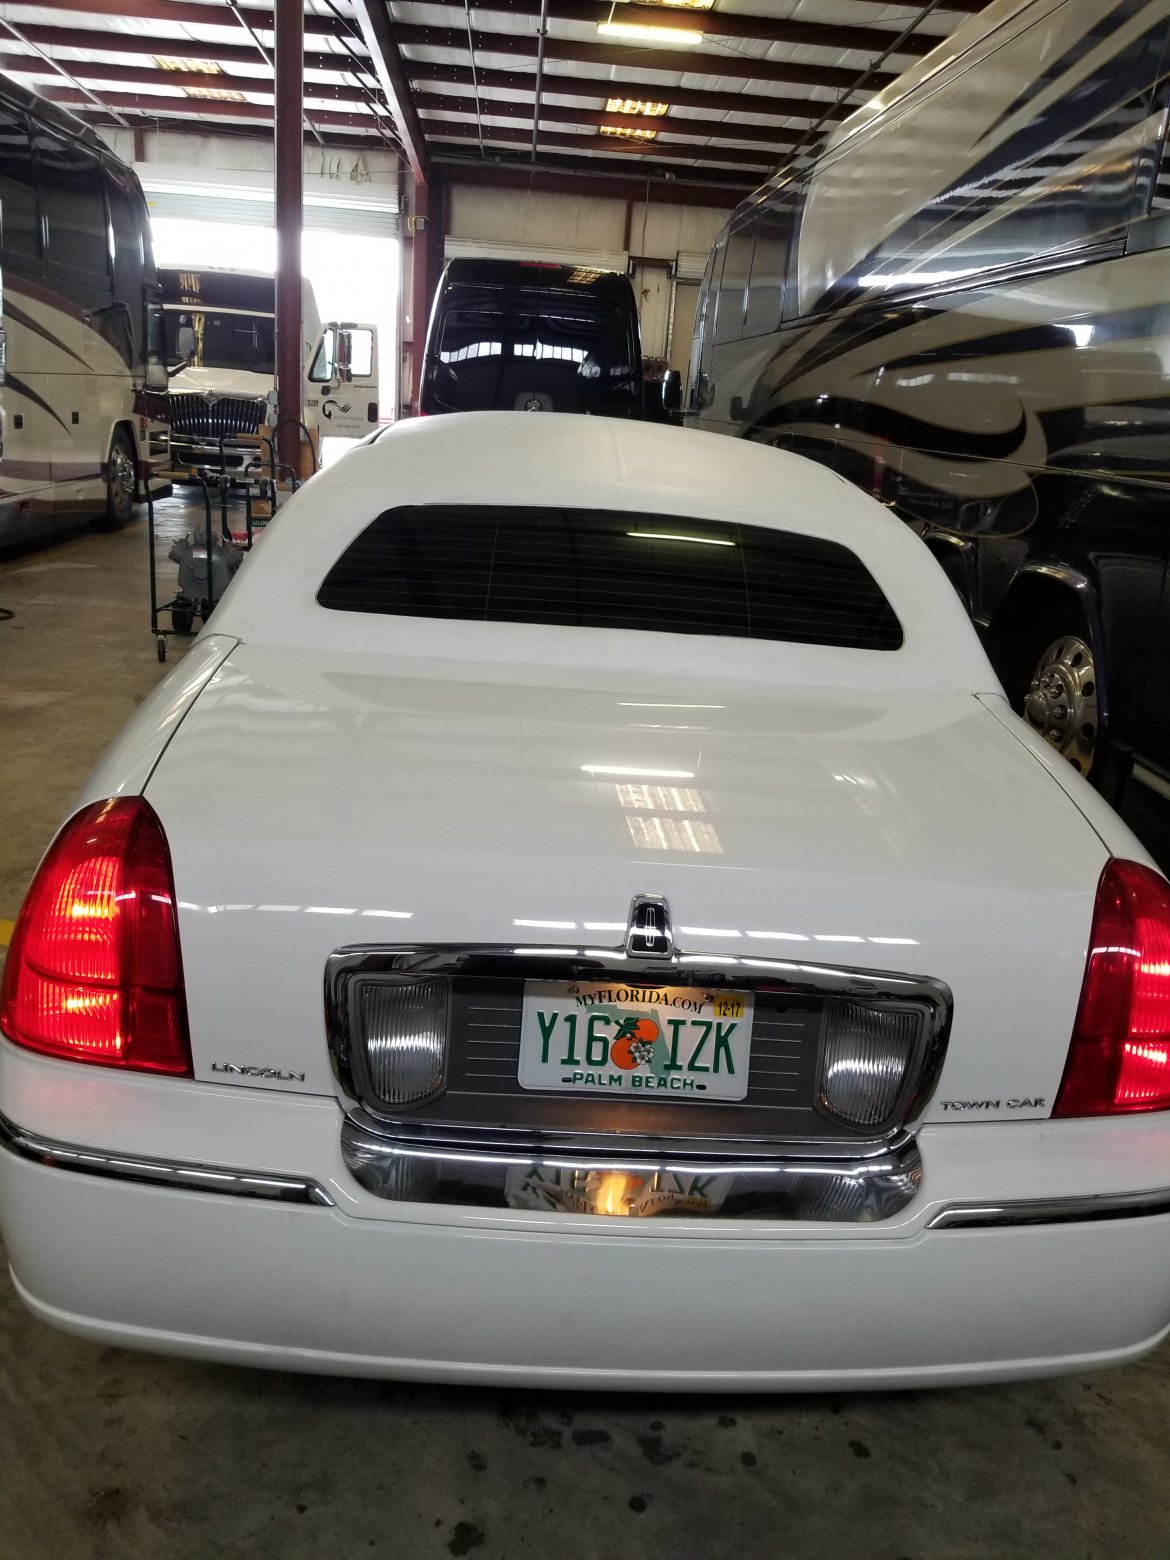 Limousine for sale: 2008 Lincoln  Towncar 120&quot; by Tiffany coachworks